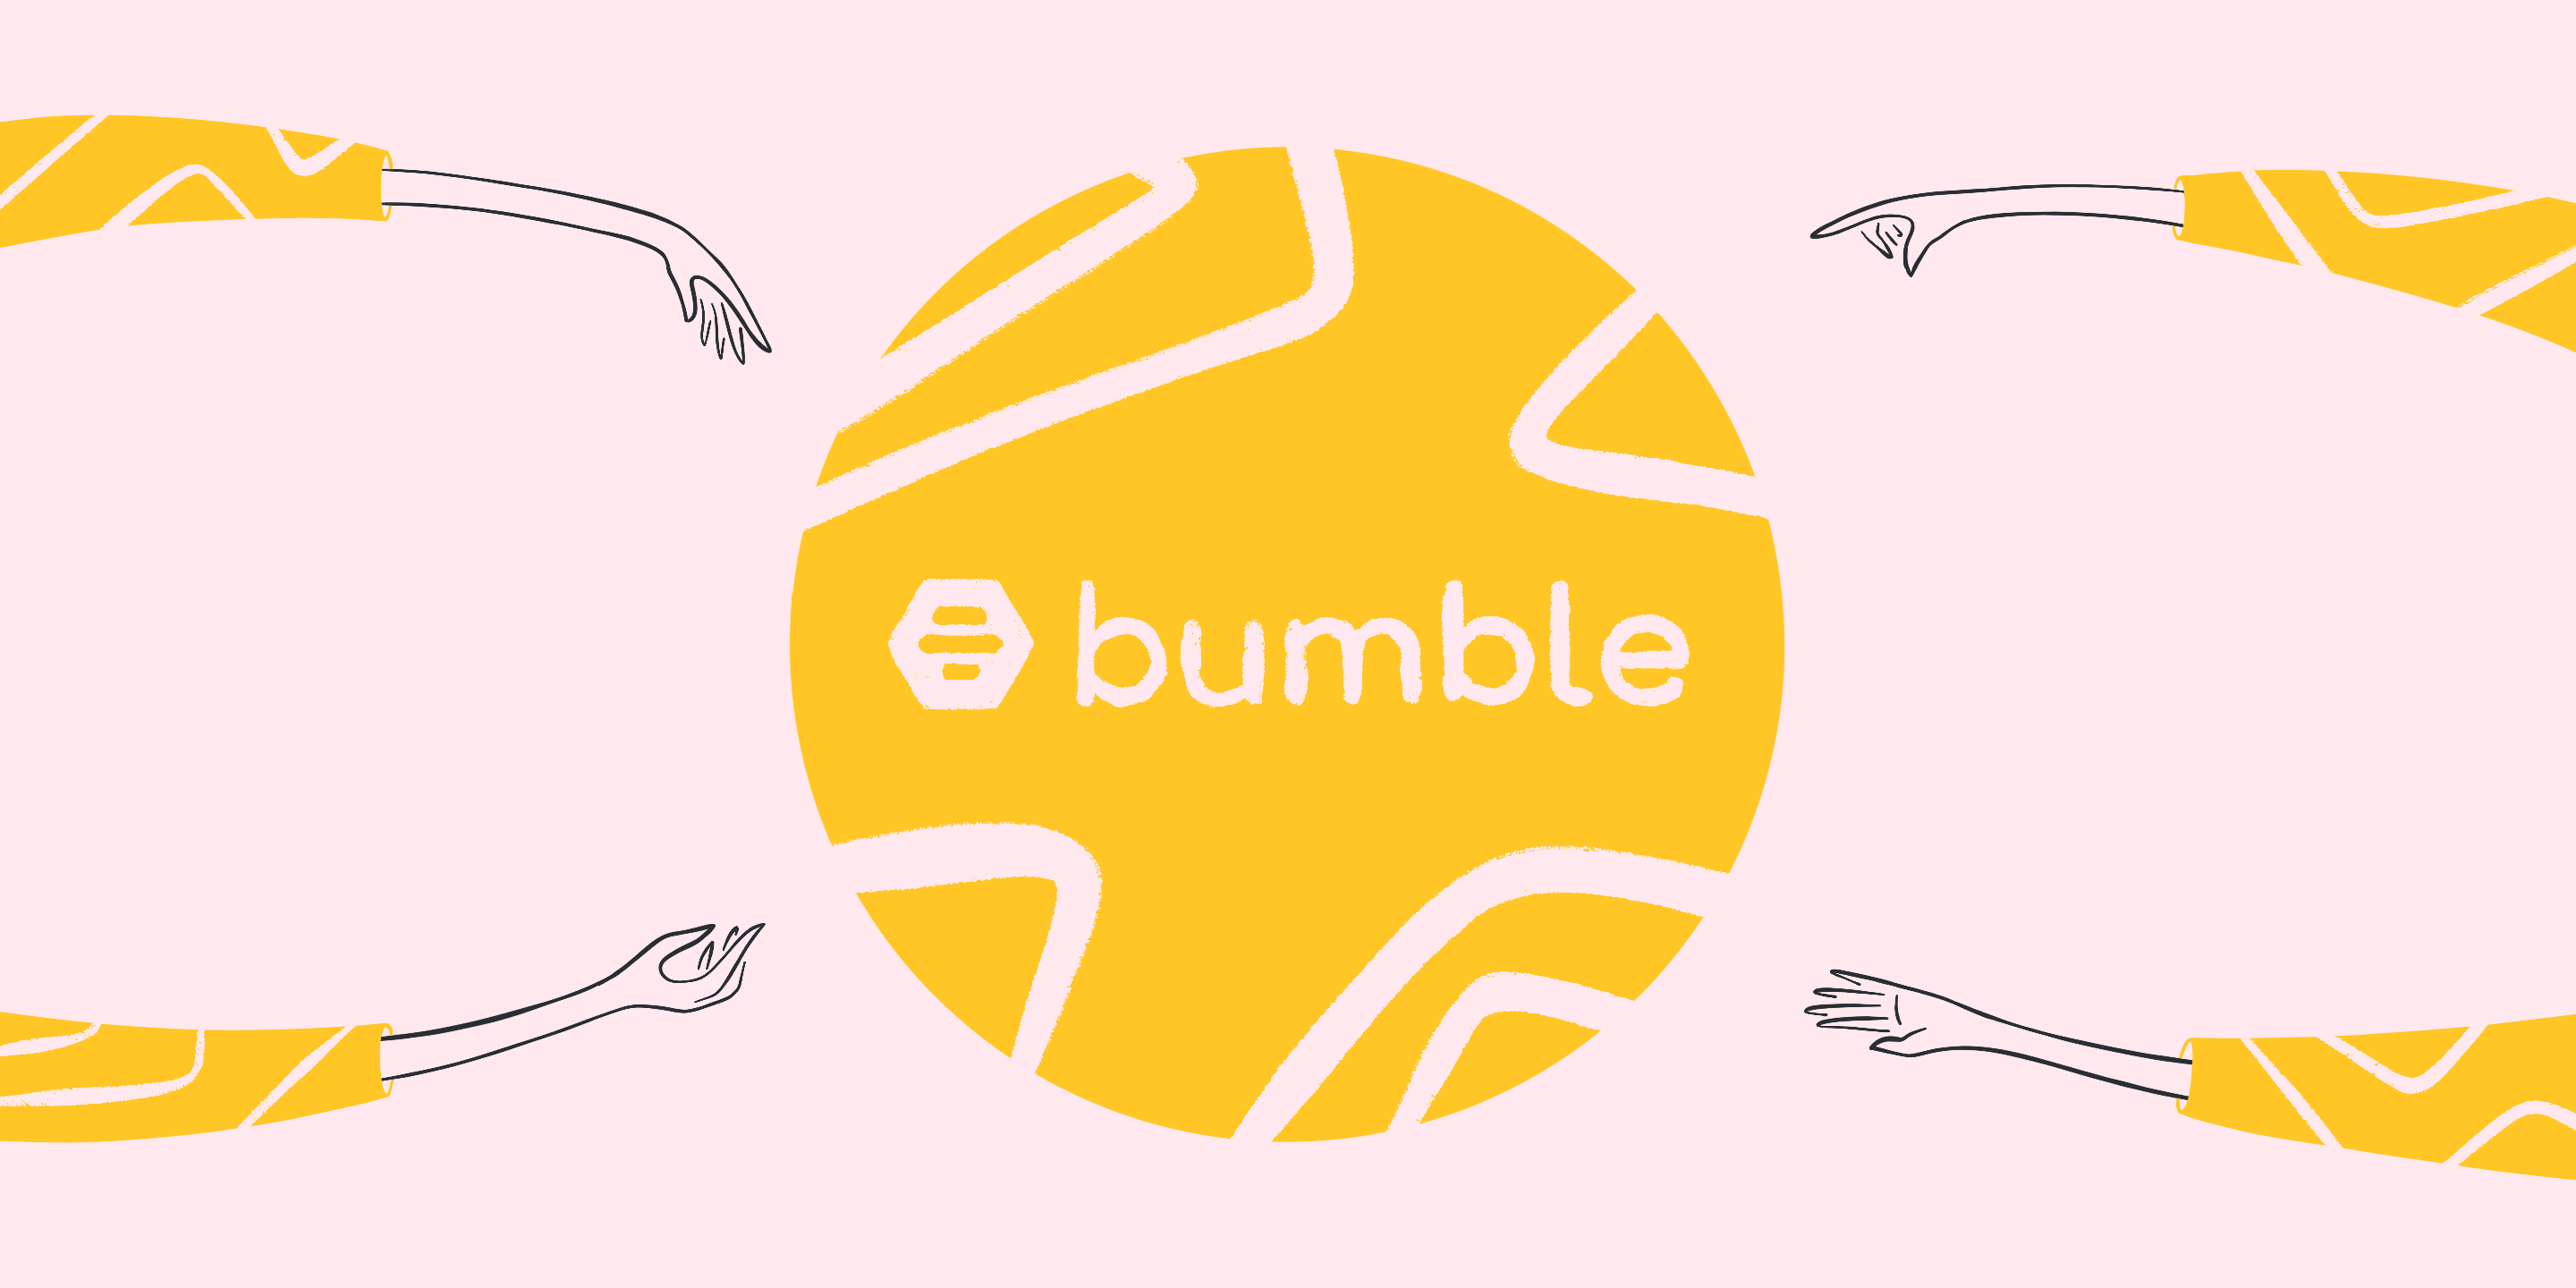 What to know about Bumble's 2021 IPO | Public.com